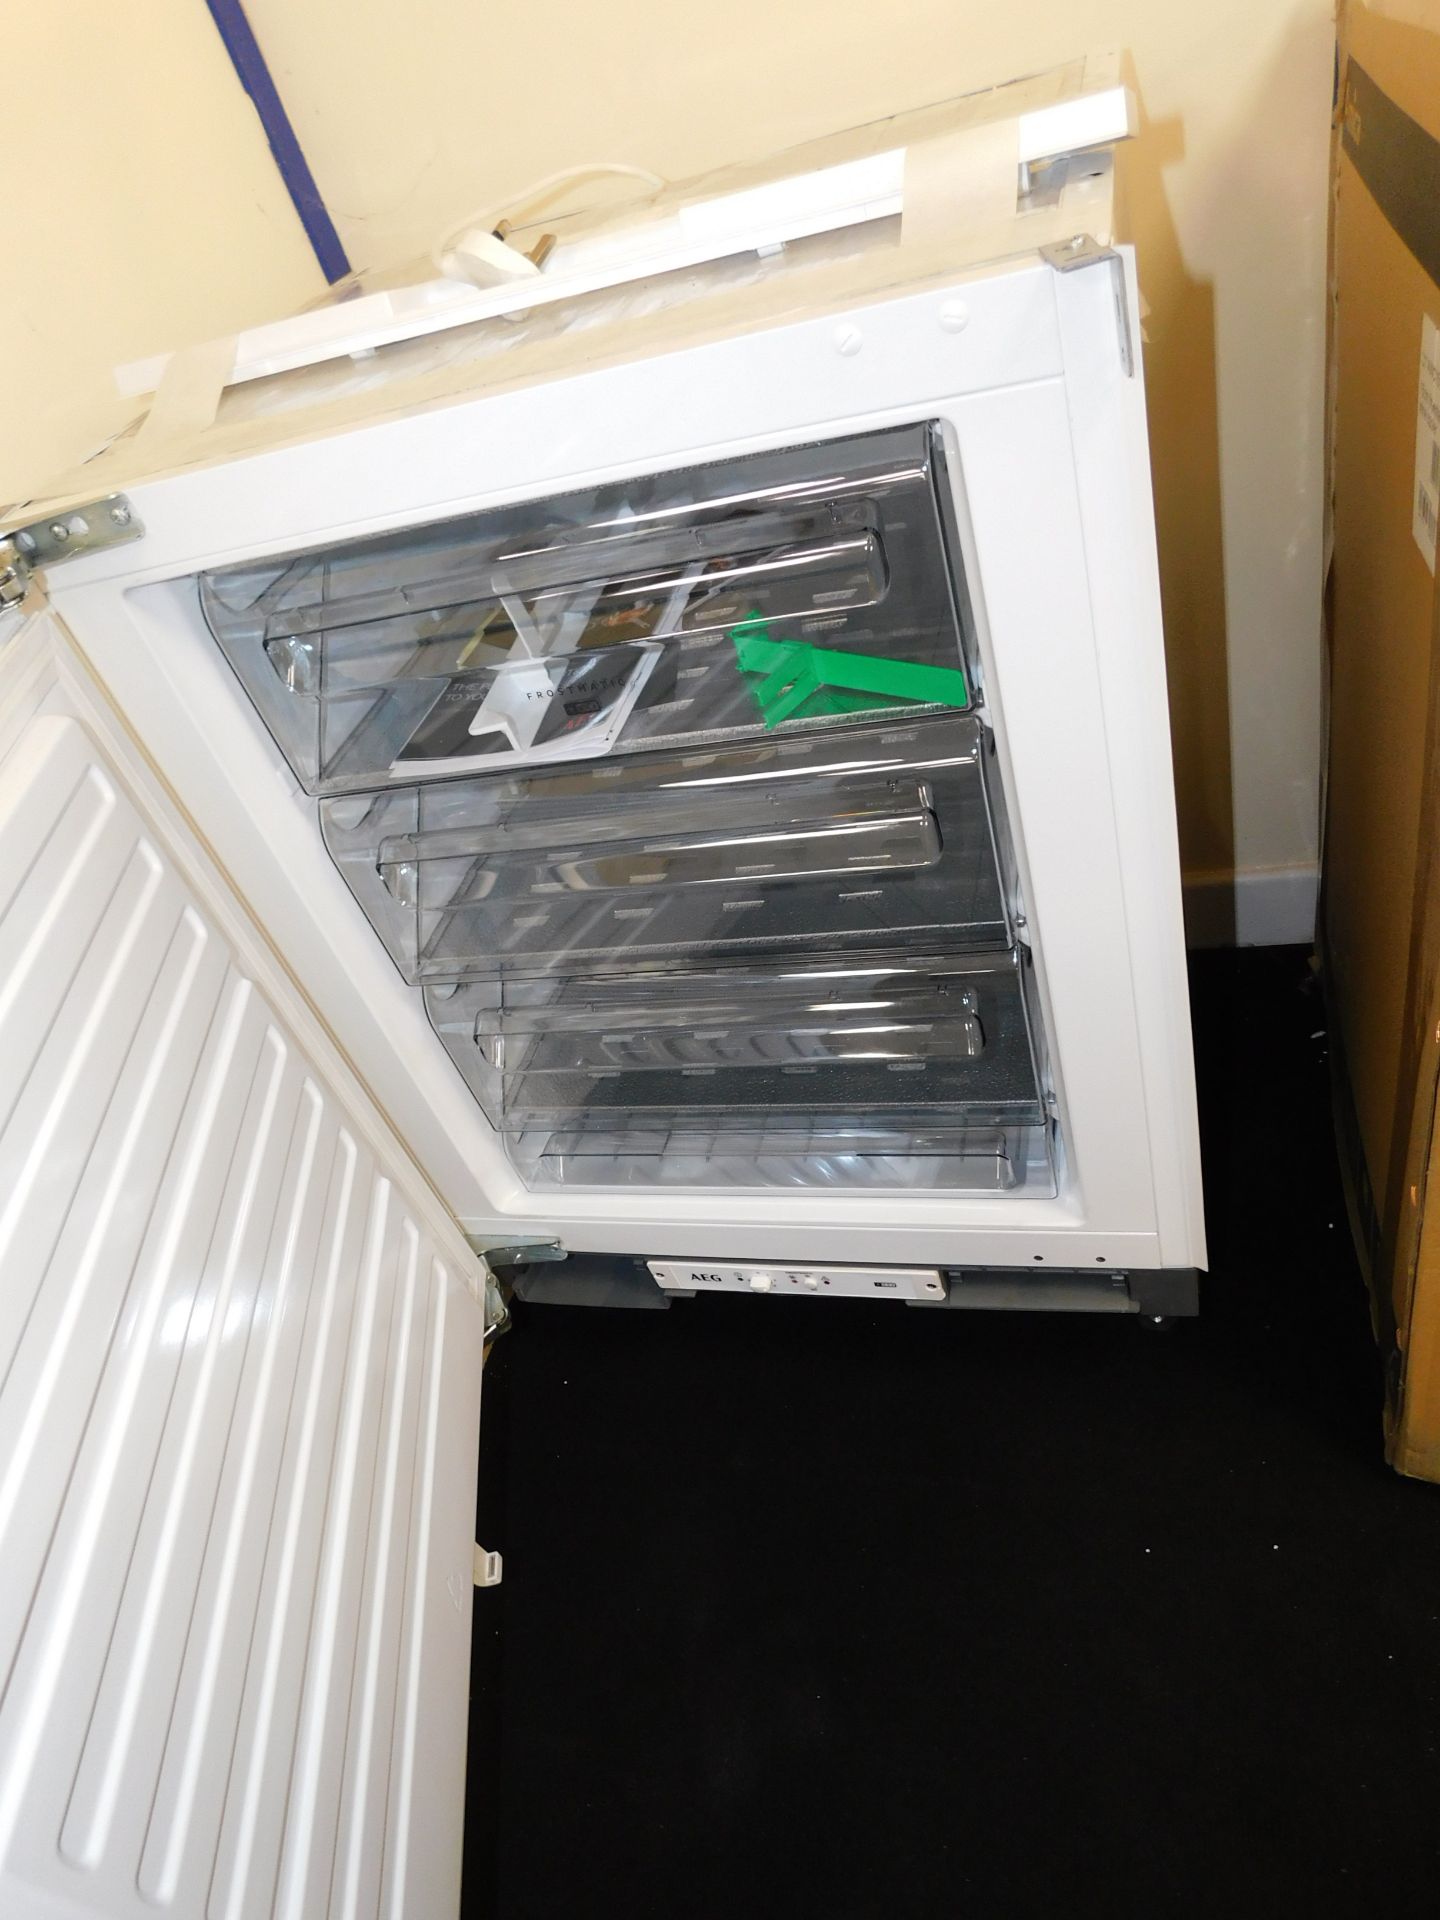 AEG 820FZDOD Built-In Freezer (Location Walsall. Please Refer to General Notes) - Image 2 of 2